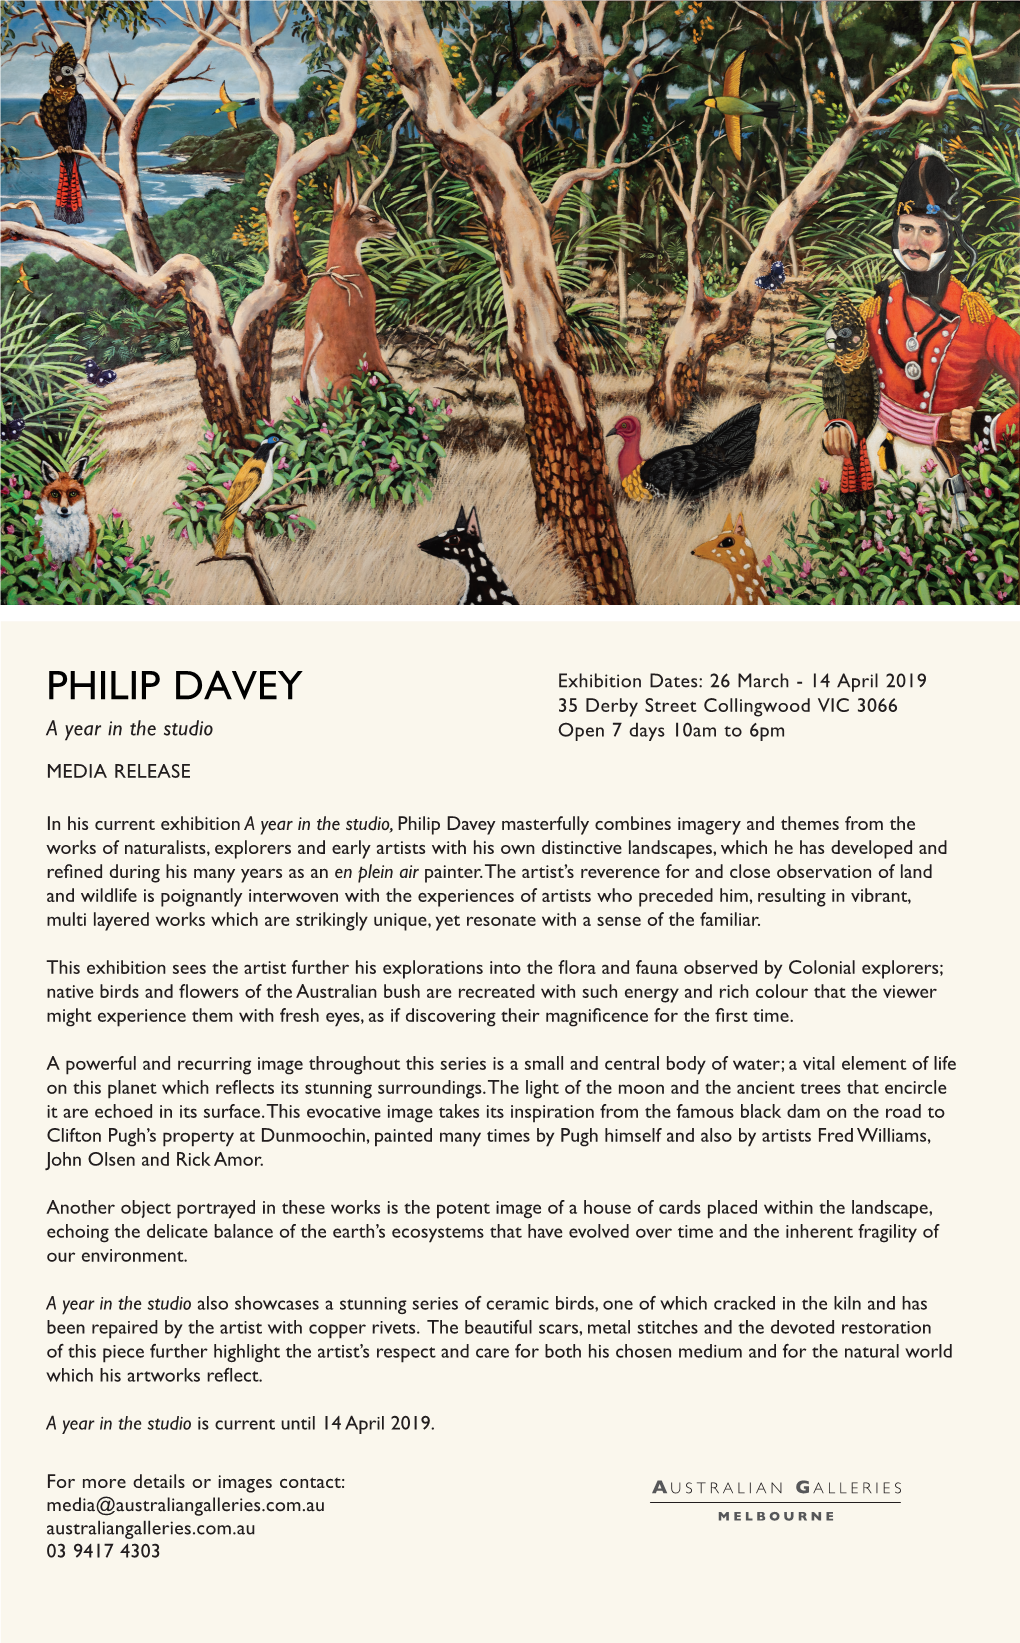 PHILIP DAVEY 35 Derby Street Collingwood VIC 3066 a Year in the Studio Open 7 Days 10Am to 6Pm